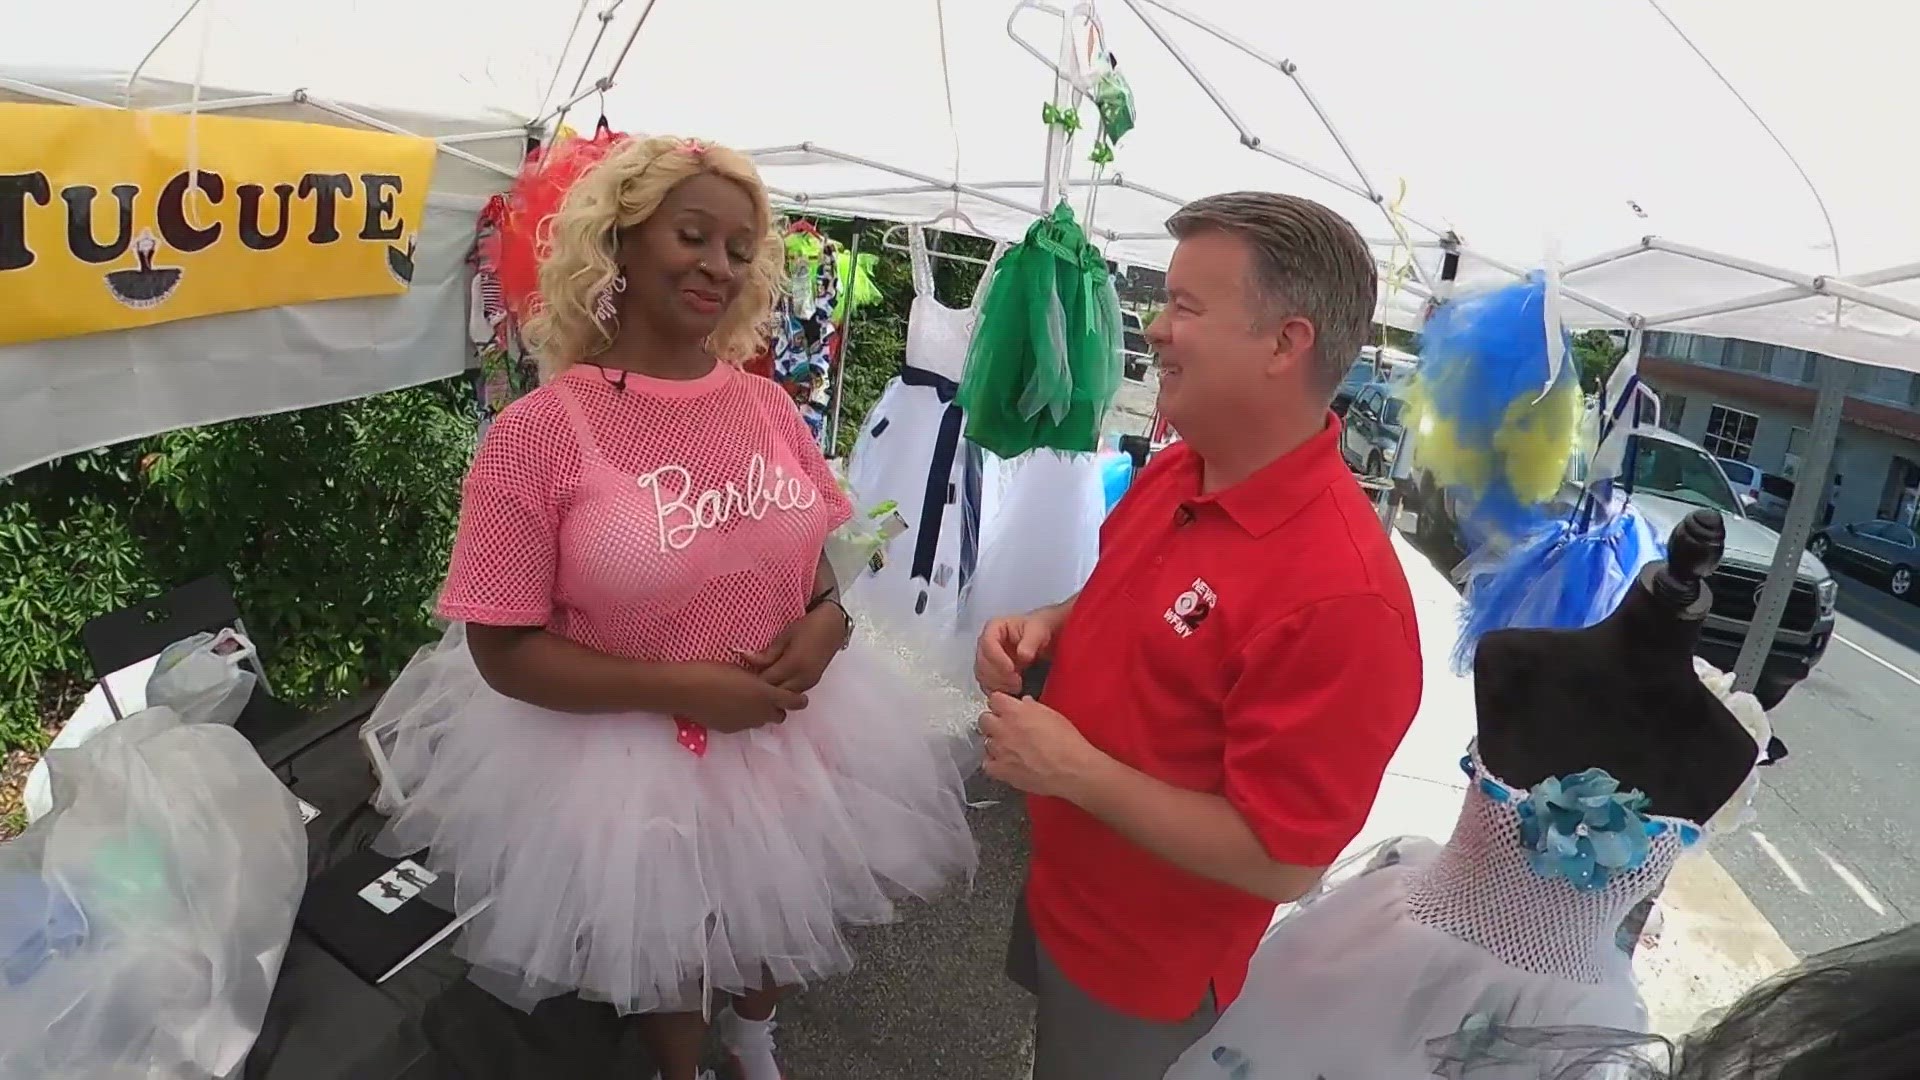 Eric Chilton met a woman helping everyone branch out and expand their wardrobe with tutus.